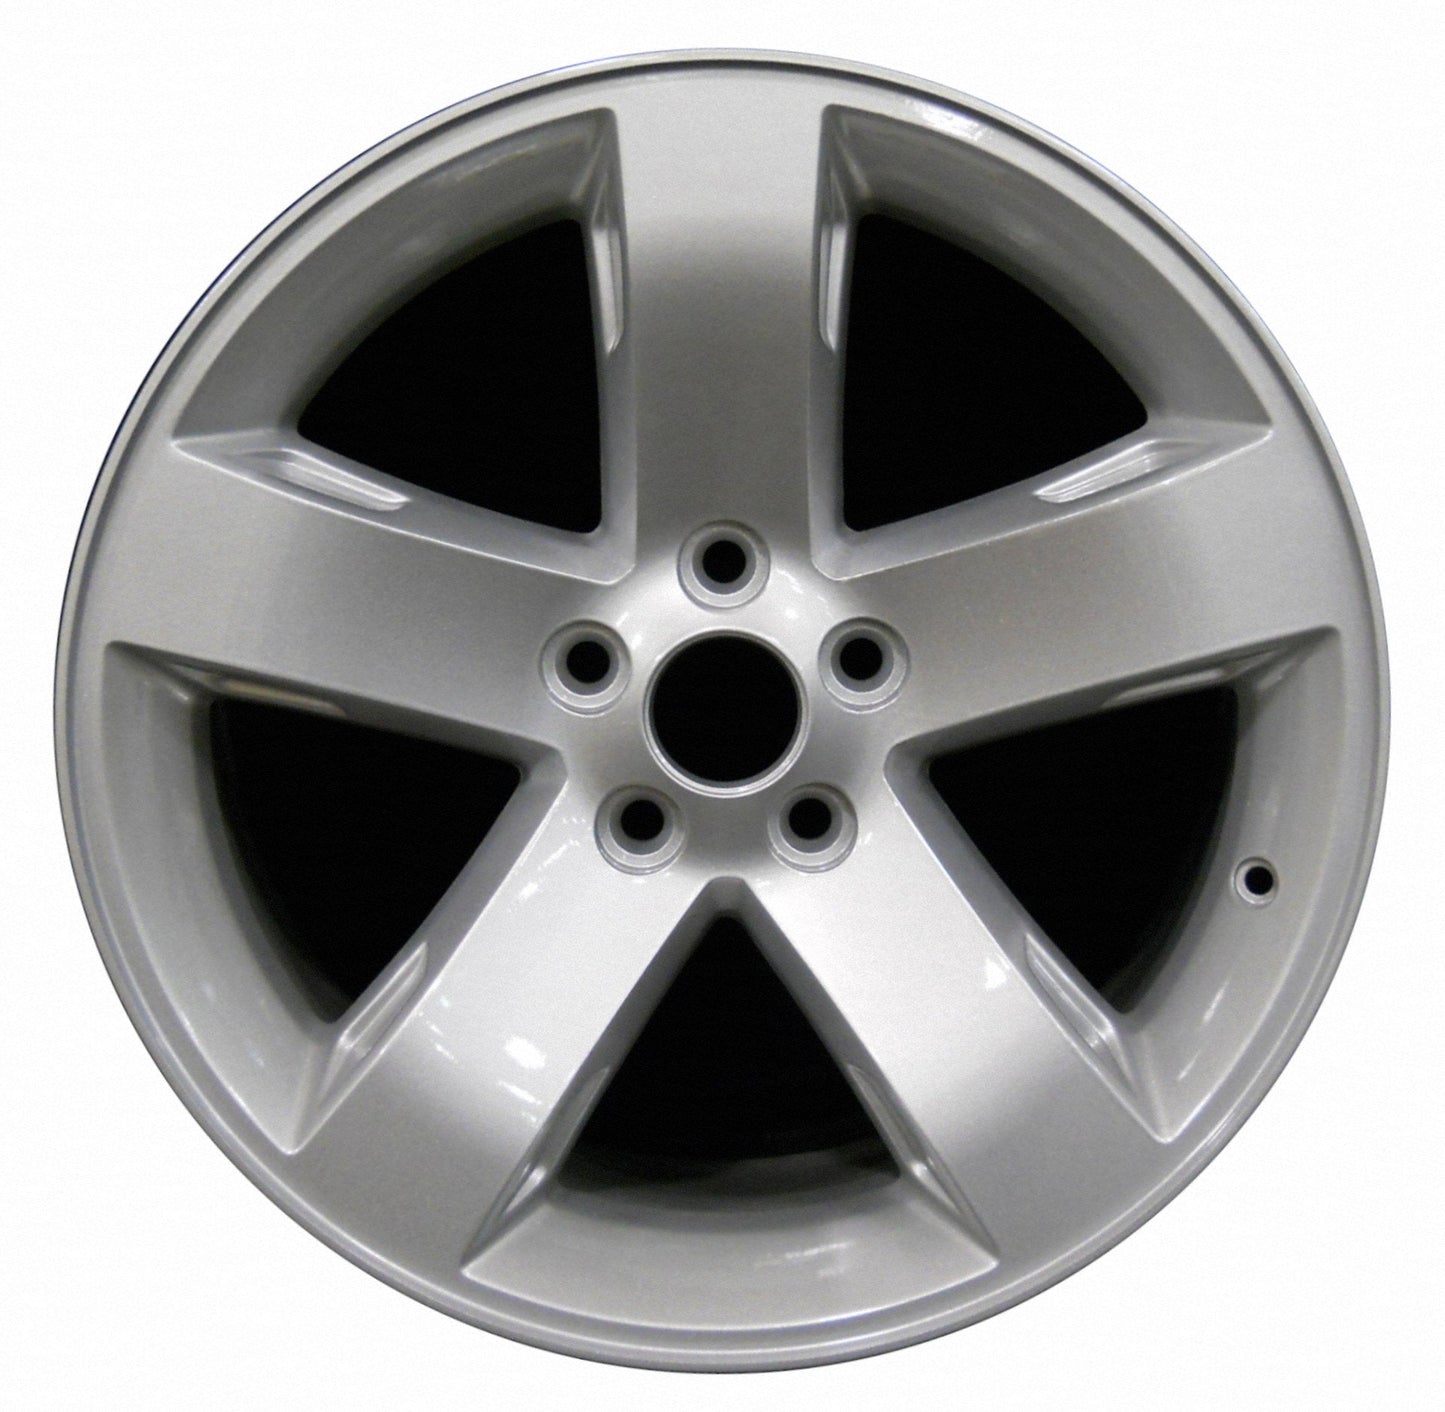 Dodge Charger  2006, 2007, 2008, 2009, 2010 Factory OEM Car Wheel Size 18x7.5 Alloy WAO.2359B.PS09.FF